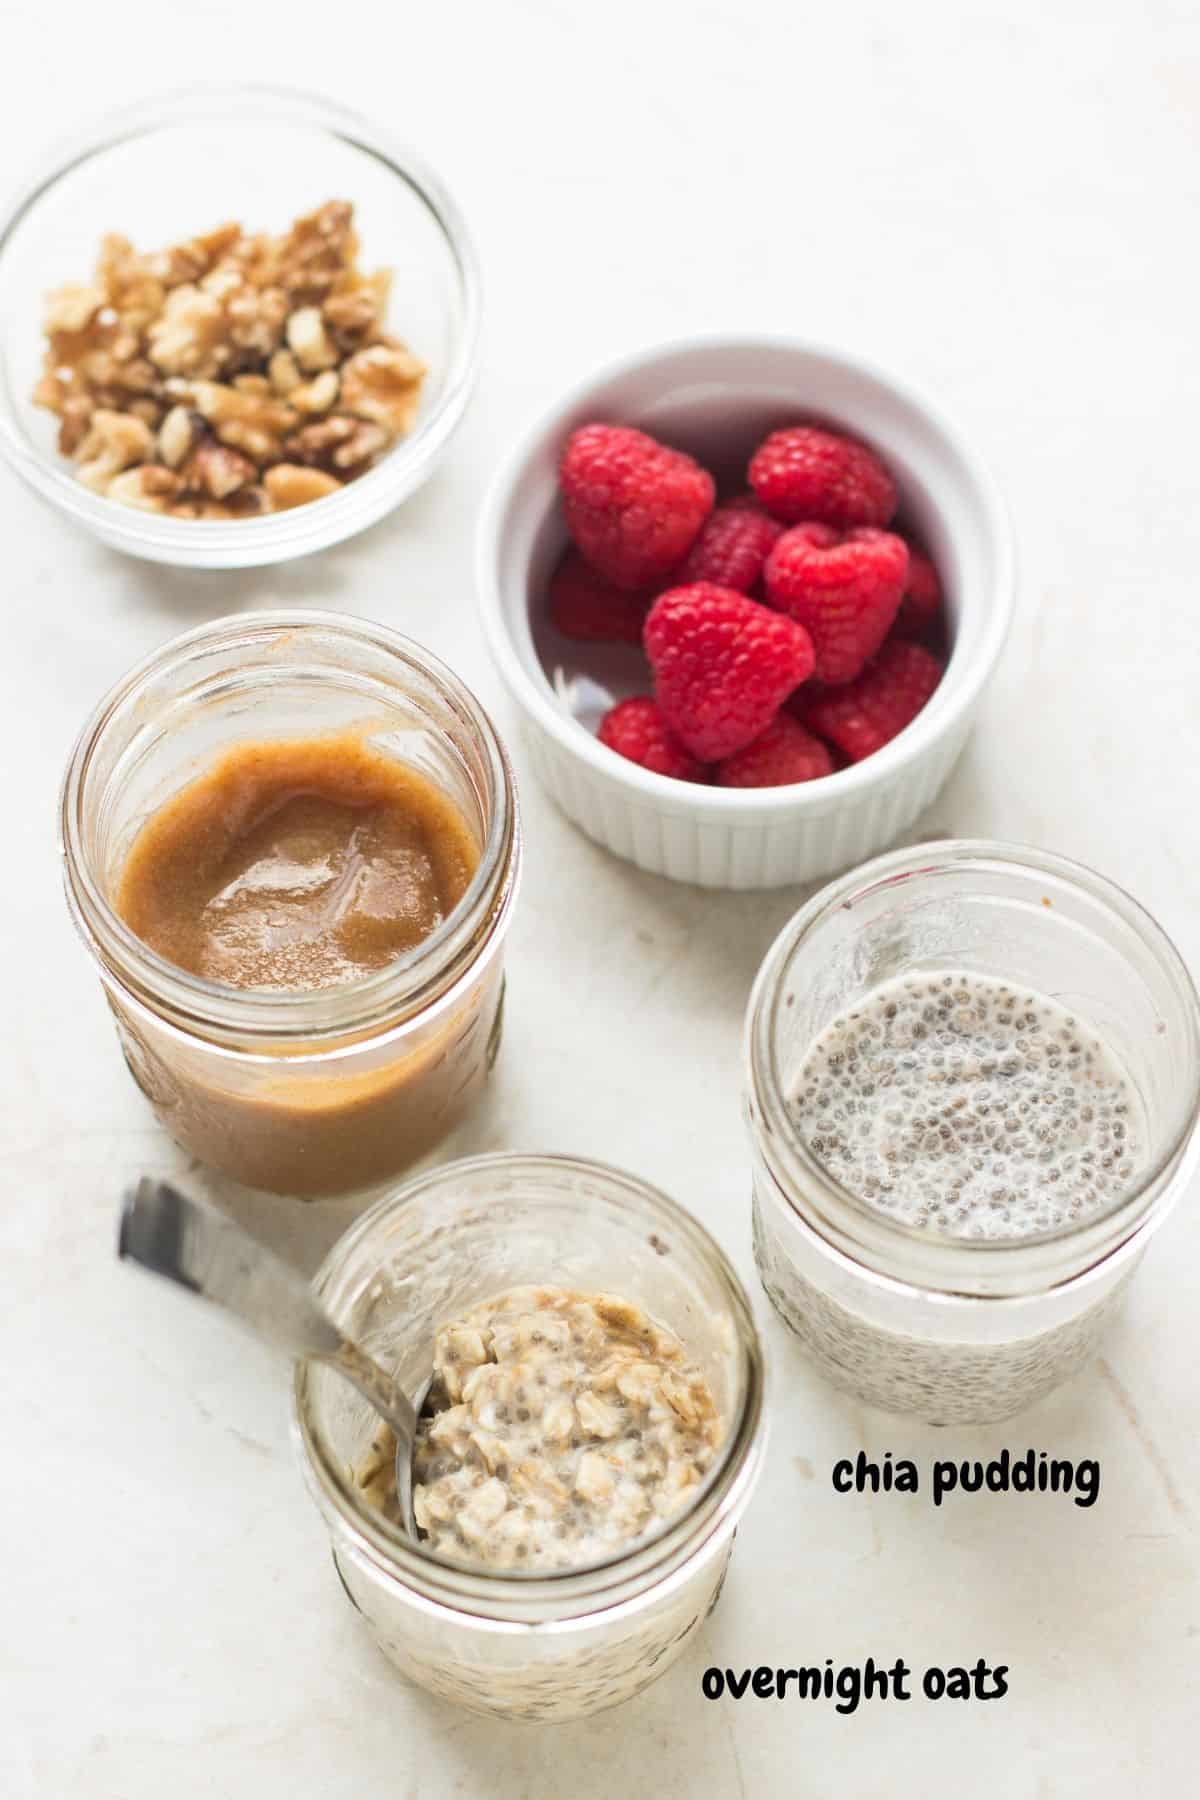 Date syrup with overnight oats, chia pudding, raspberries, and walnuts.